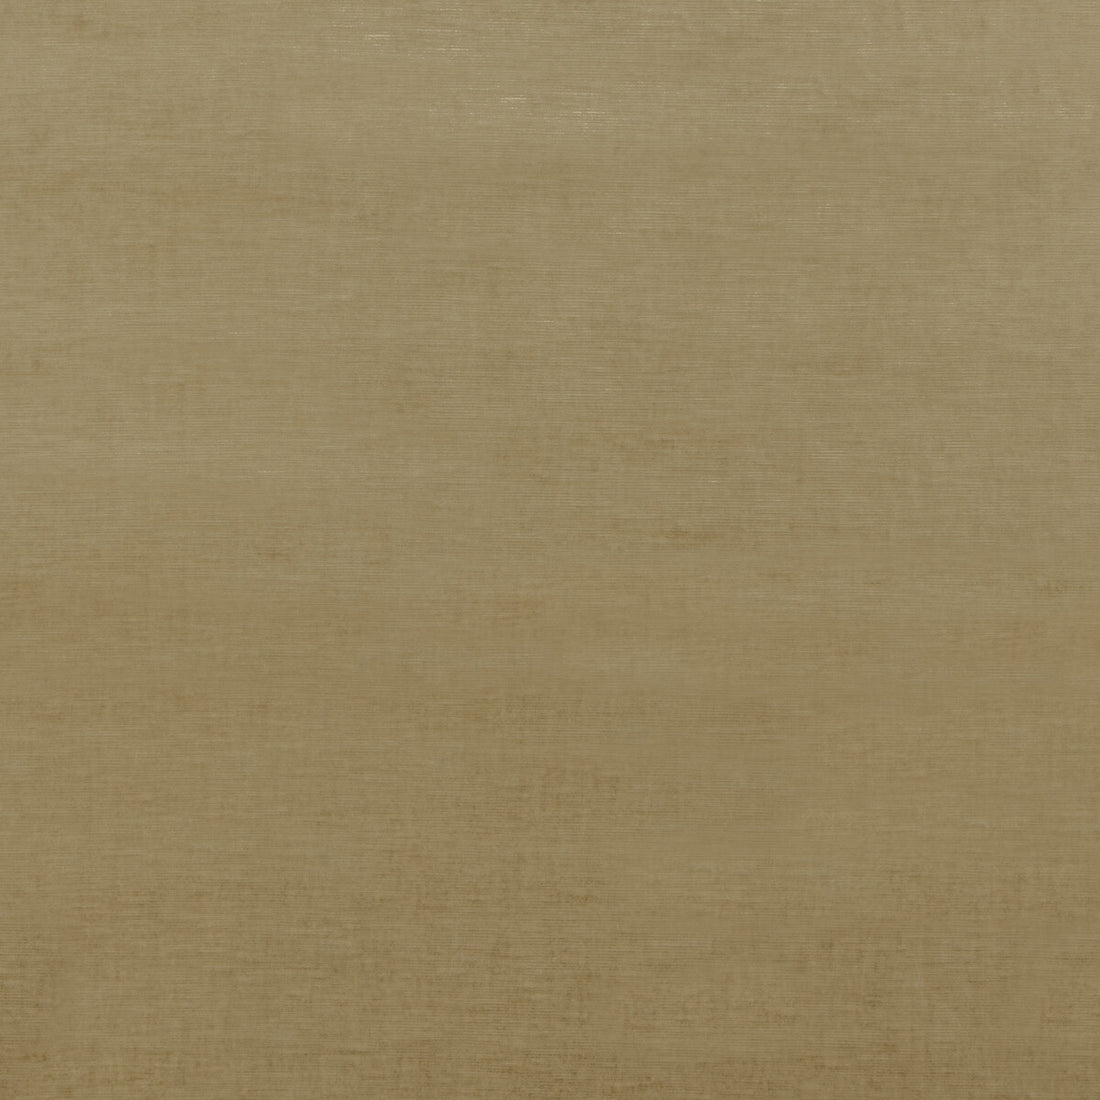 Meridian Velvet fabric in camel color - pattern ED85292.170.0 - by Threads in the Meridian collection